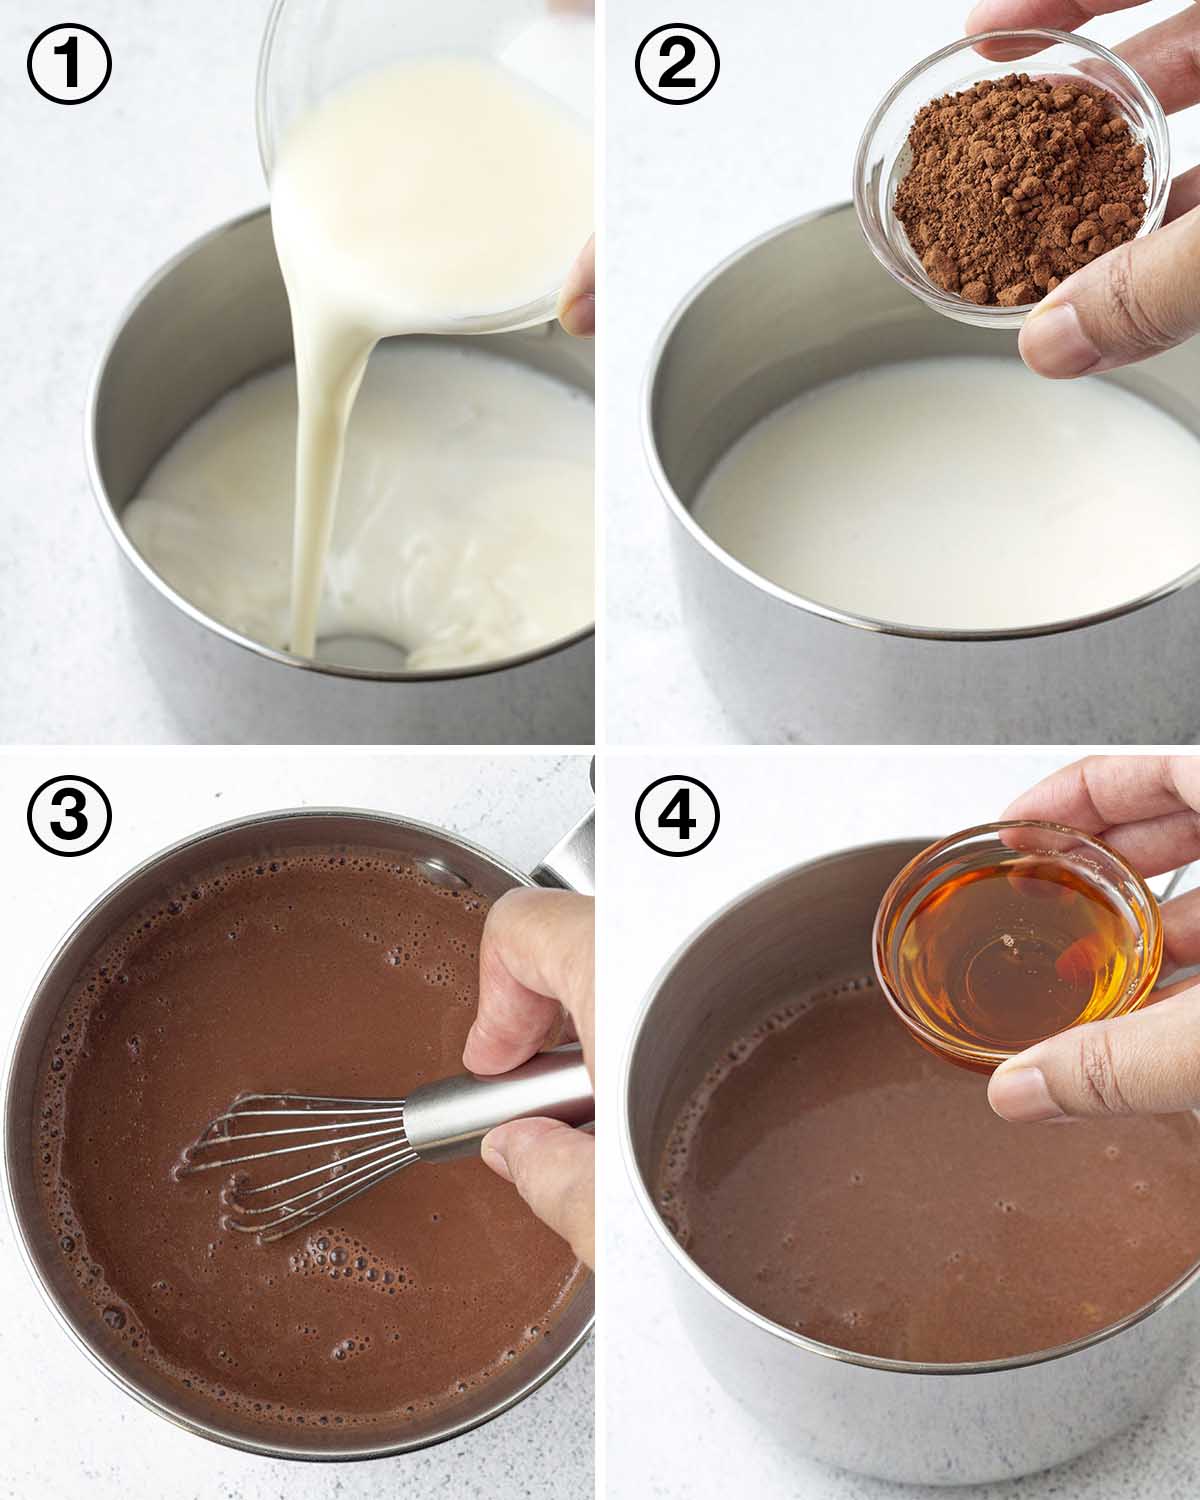 A collage of four images showing the sequence of steps needed to make vegan hot chocolate.